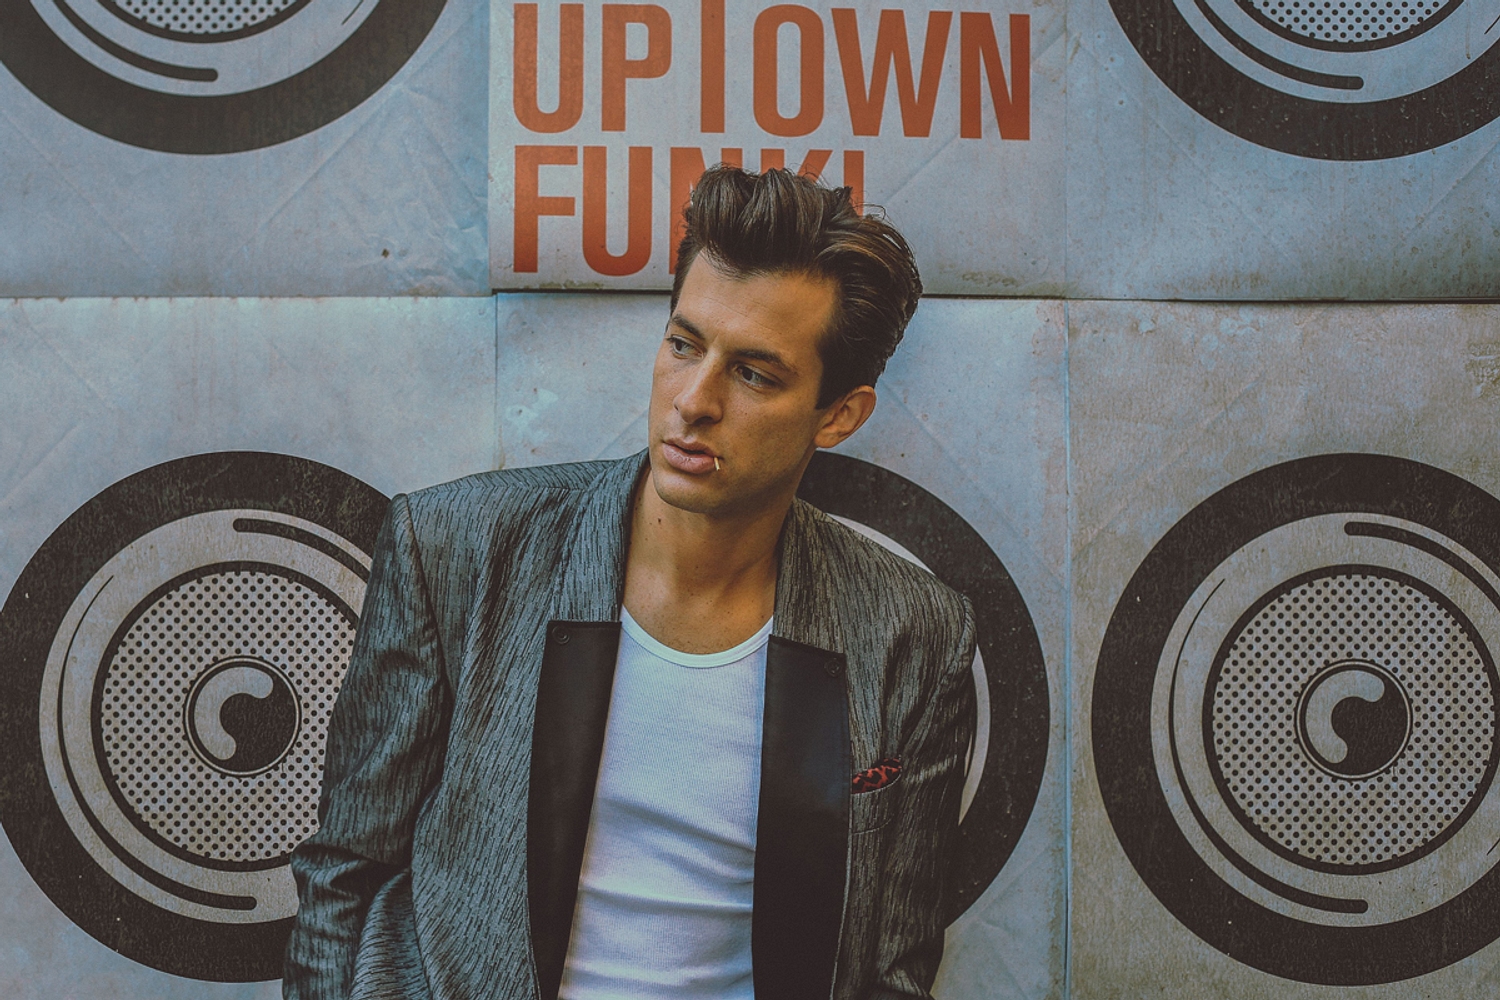 2015’s going uptown: Mark Ronson profiled